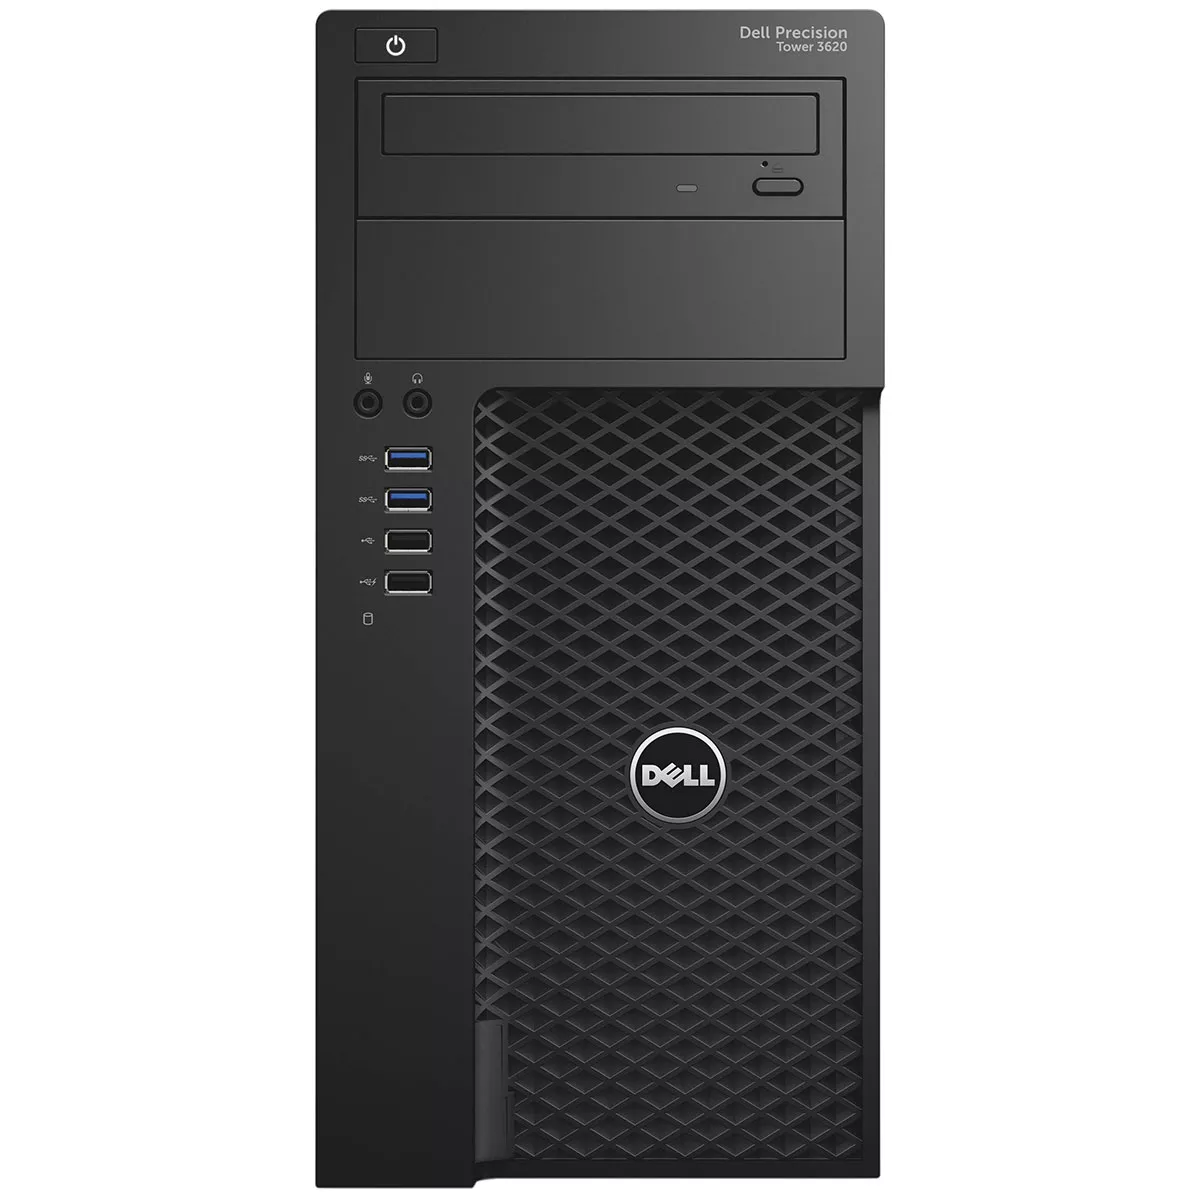 https://www.xgamertechnologies.com/images/products/Dell Precision Workstation Tower 3620 16gb RAM 4ghz xeon 3TB HDD 400gb SSD Refurbished Computer with 3 free games.webp